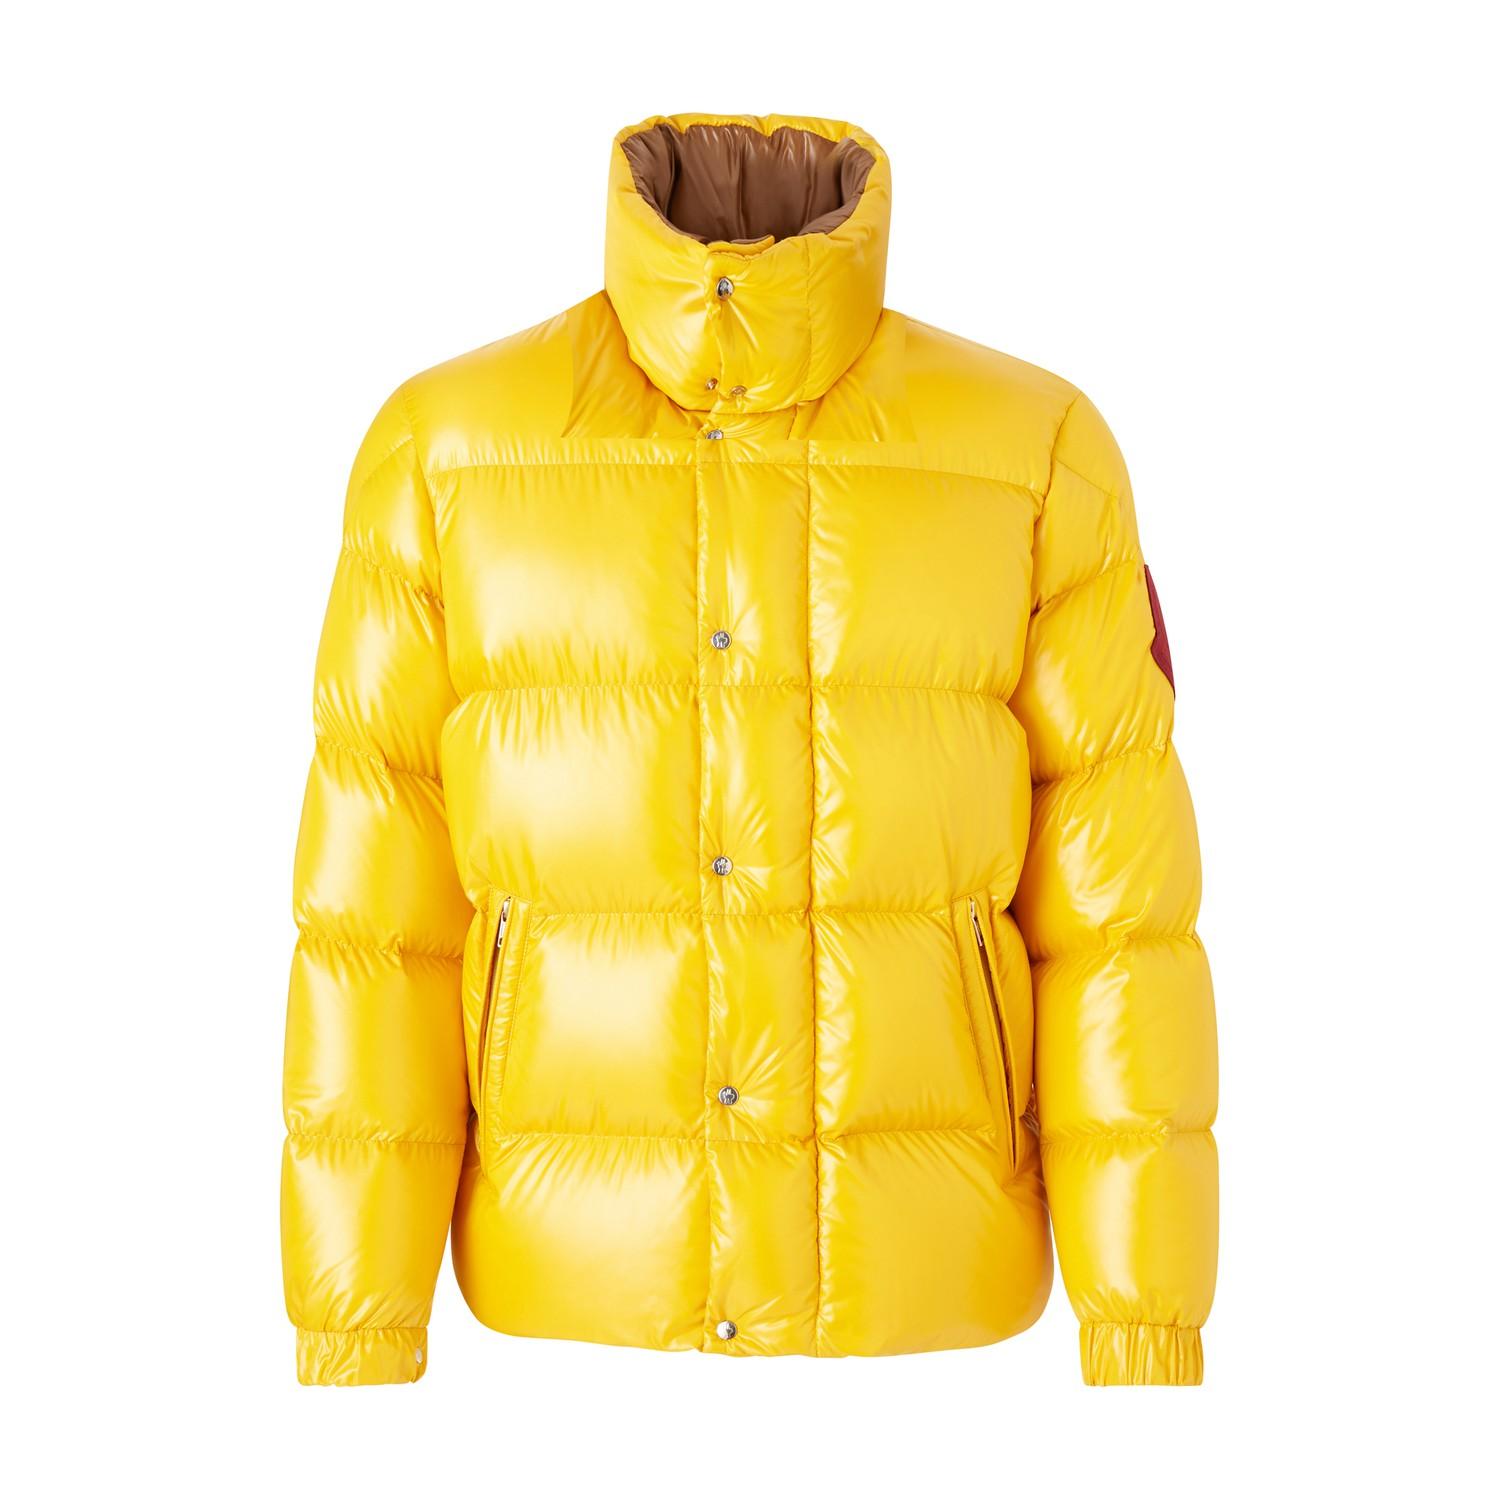 Moncler Genius Synthetic 1952 - Dervaux Jacket in Yellow for Men - Lyst